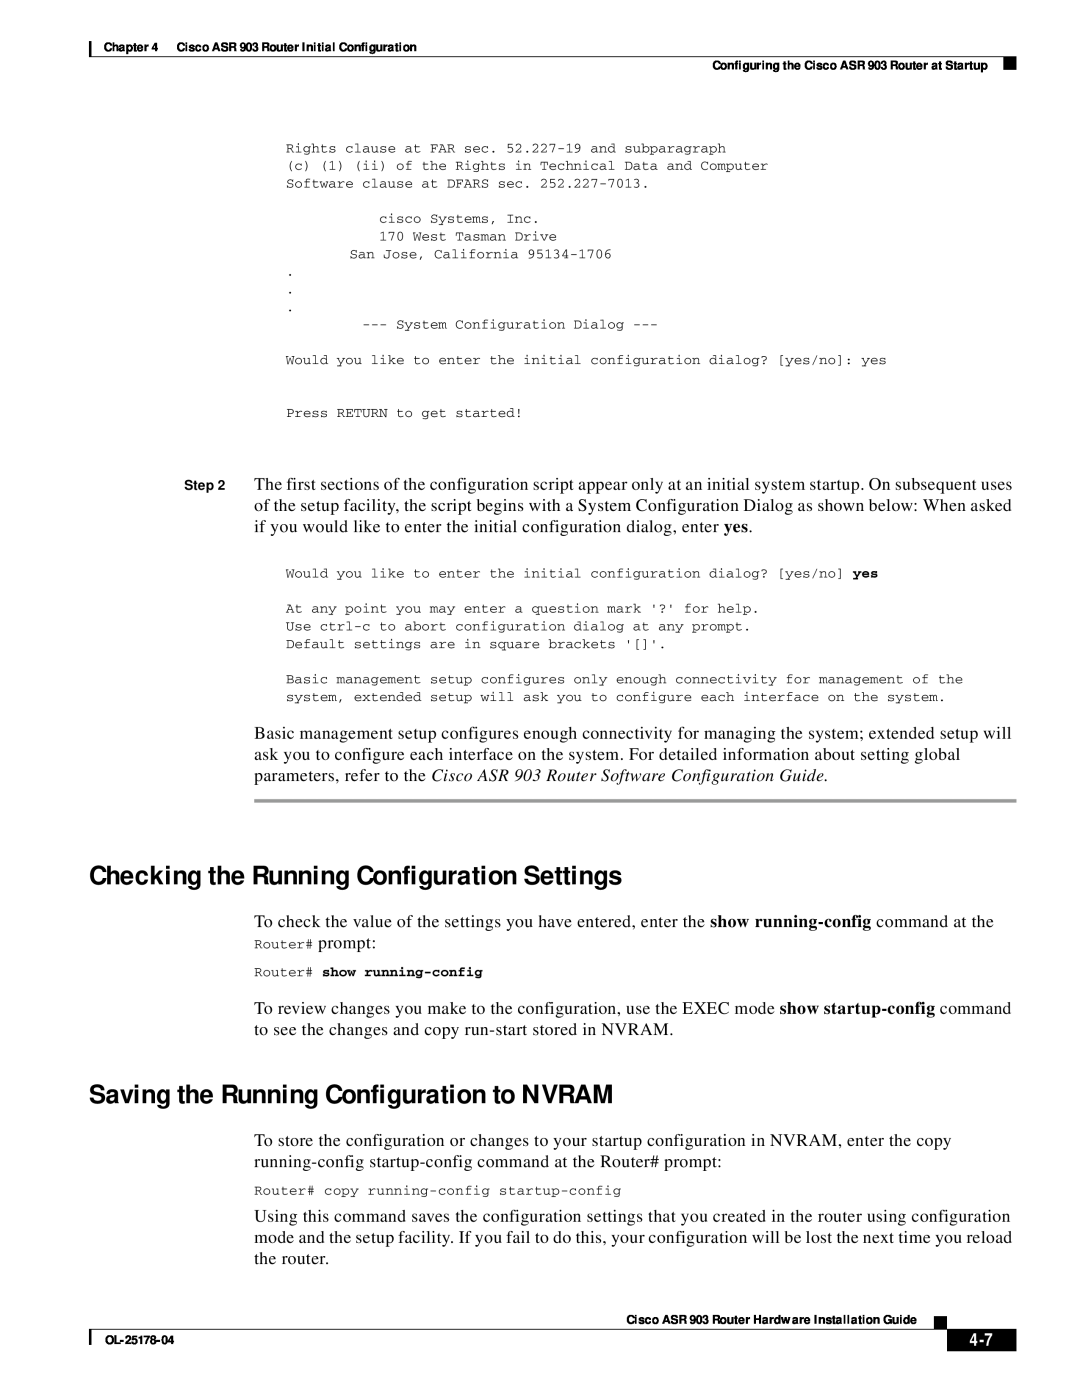 Cisco Systems ASR 903 manual Checking the Running Configuration Settings, Saving the Running Configuration to NVRAM 